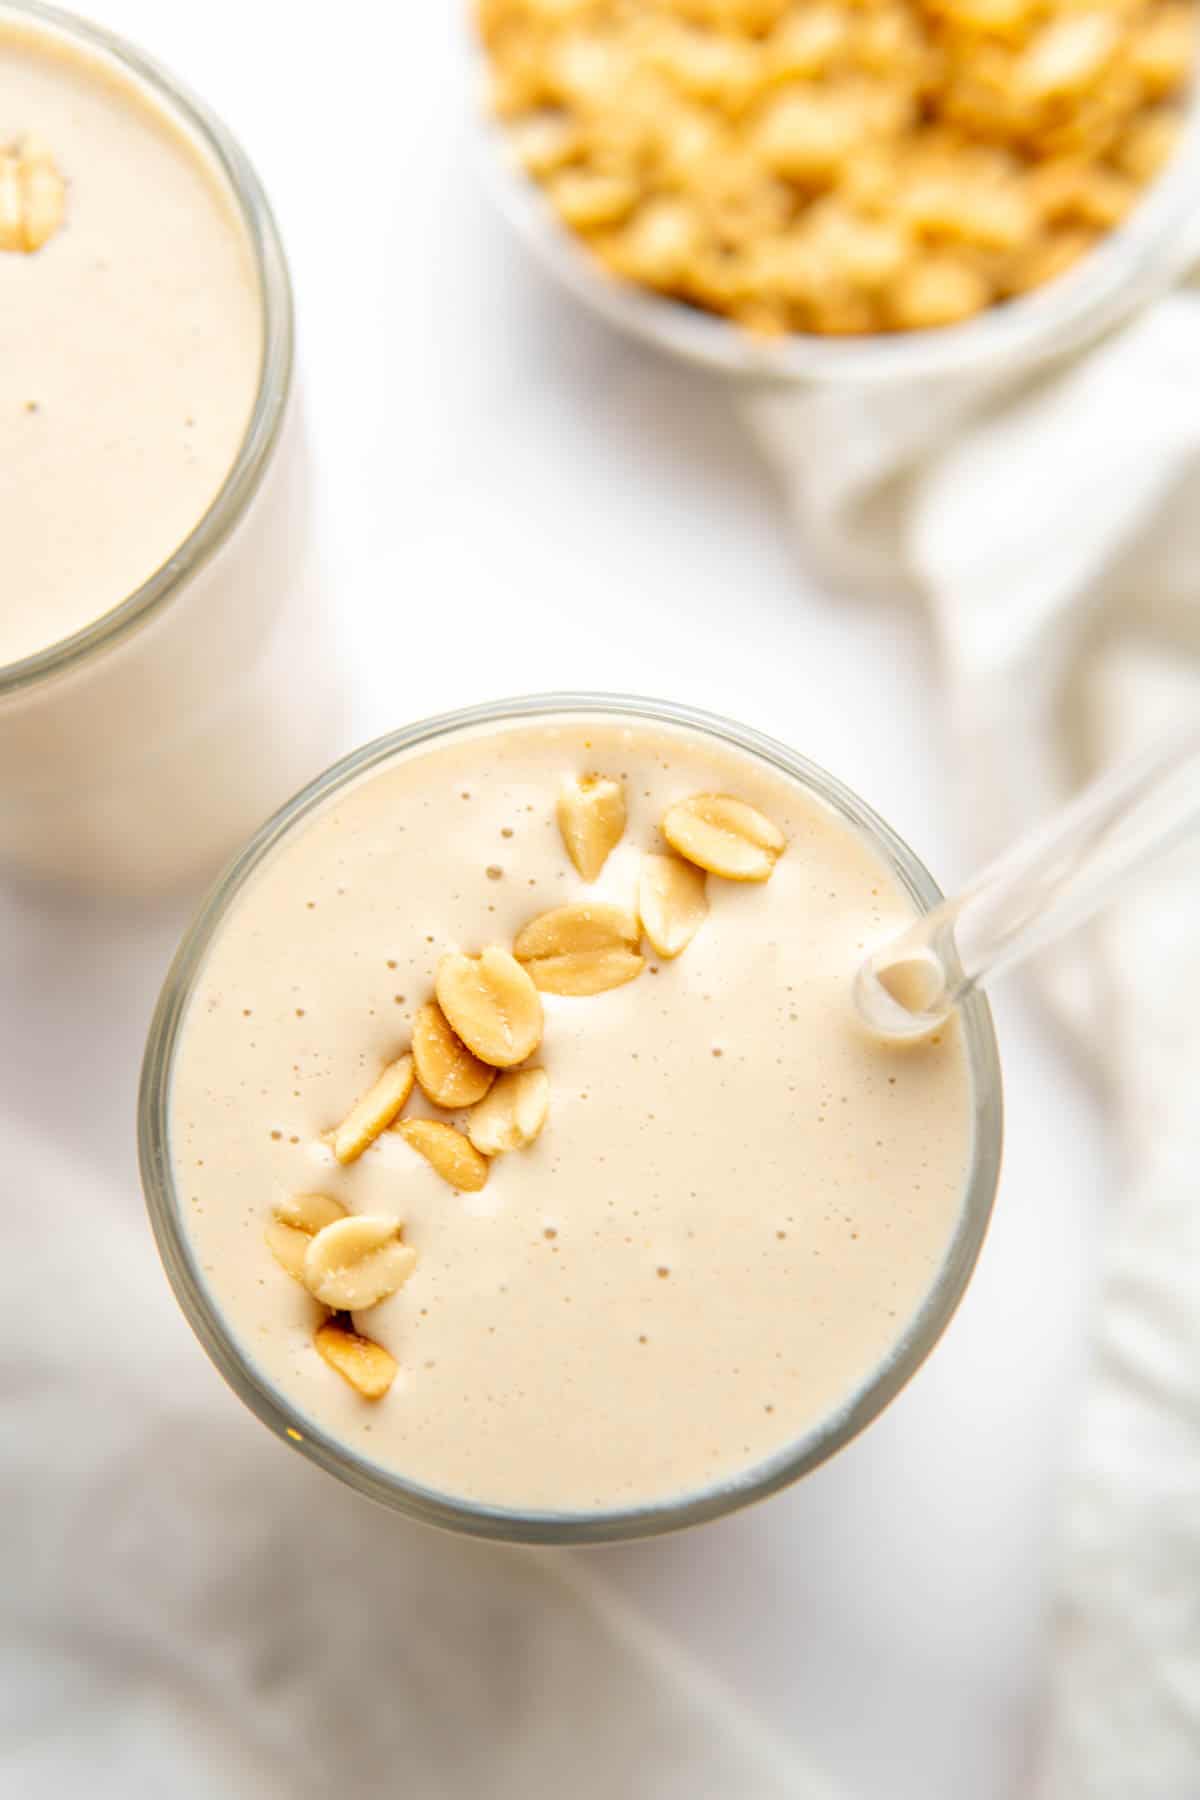 Top of the smoothie glass with the thick smoothie in a glass, garnished with some peanuts. 